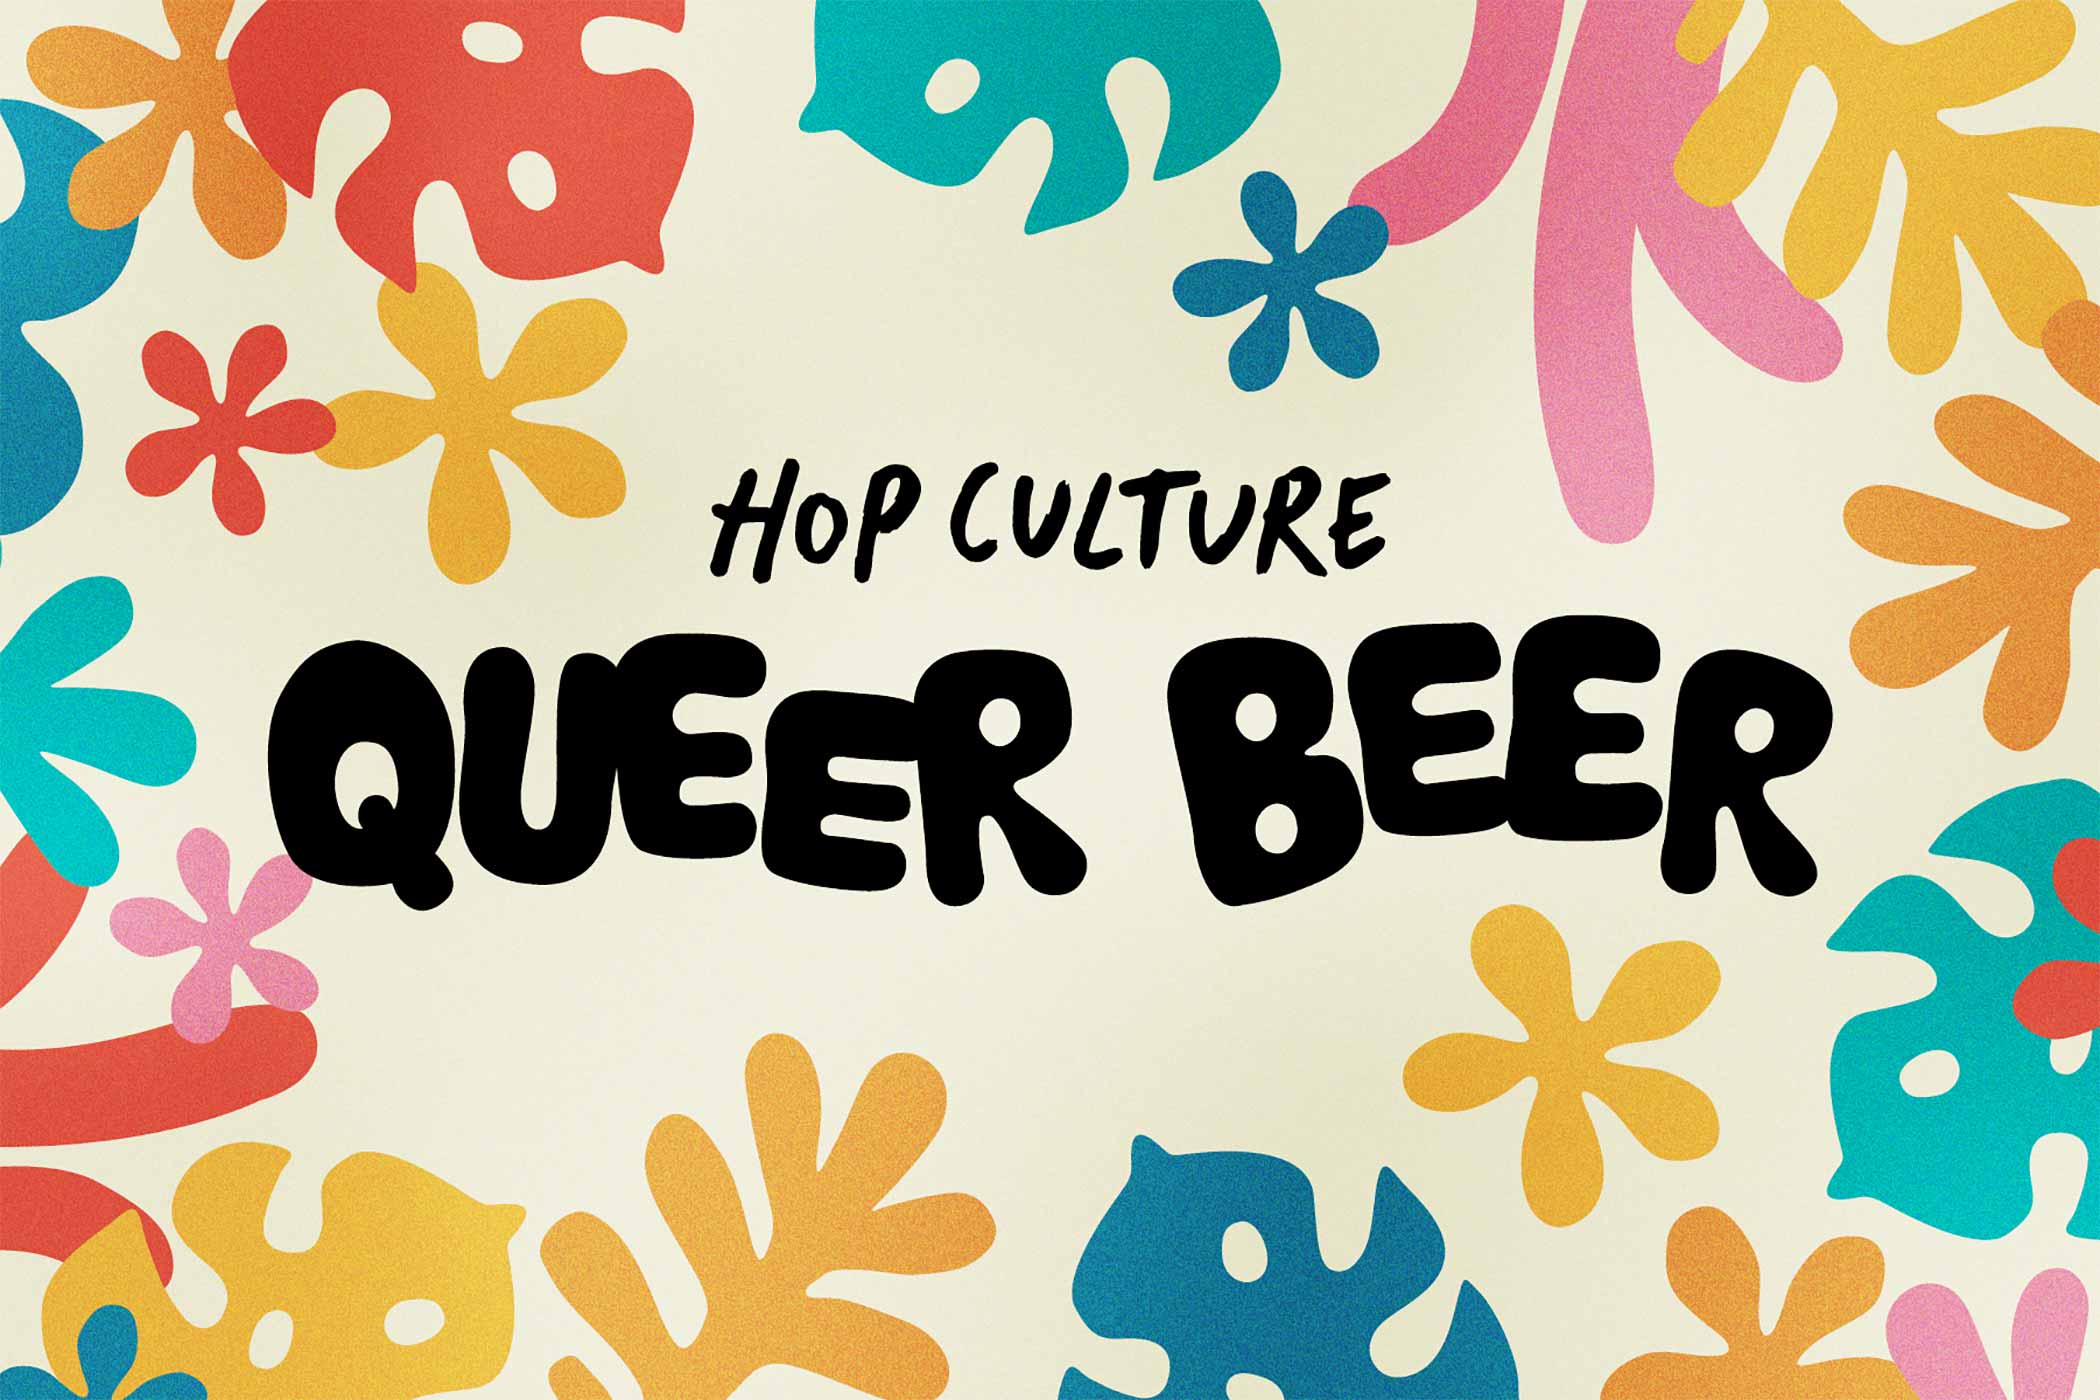 Everything You Need to Know About the 2023 Queer Beer Box